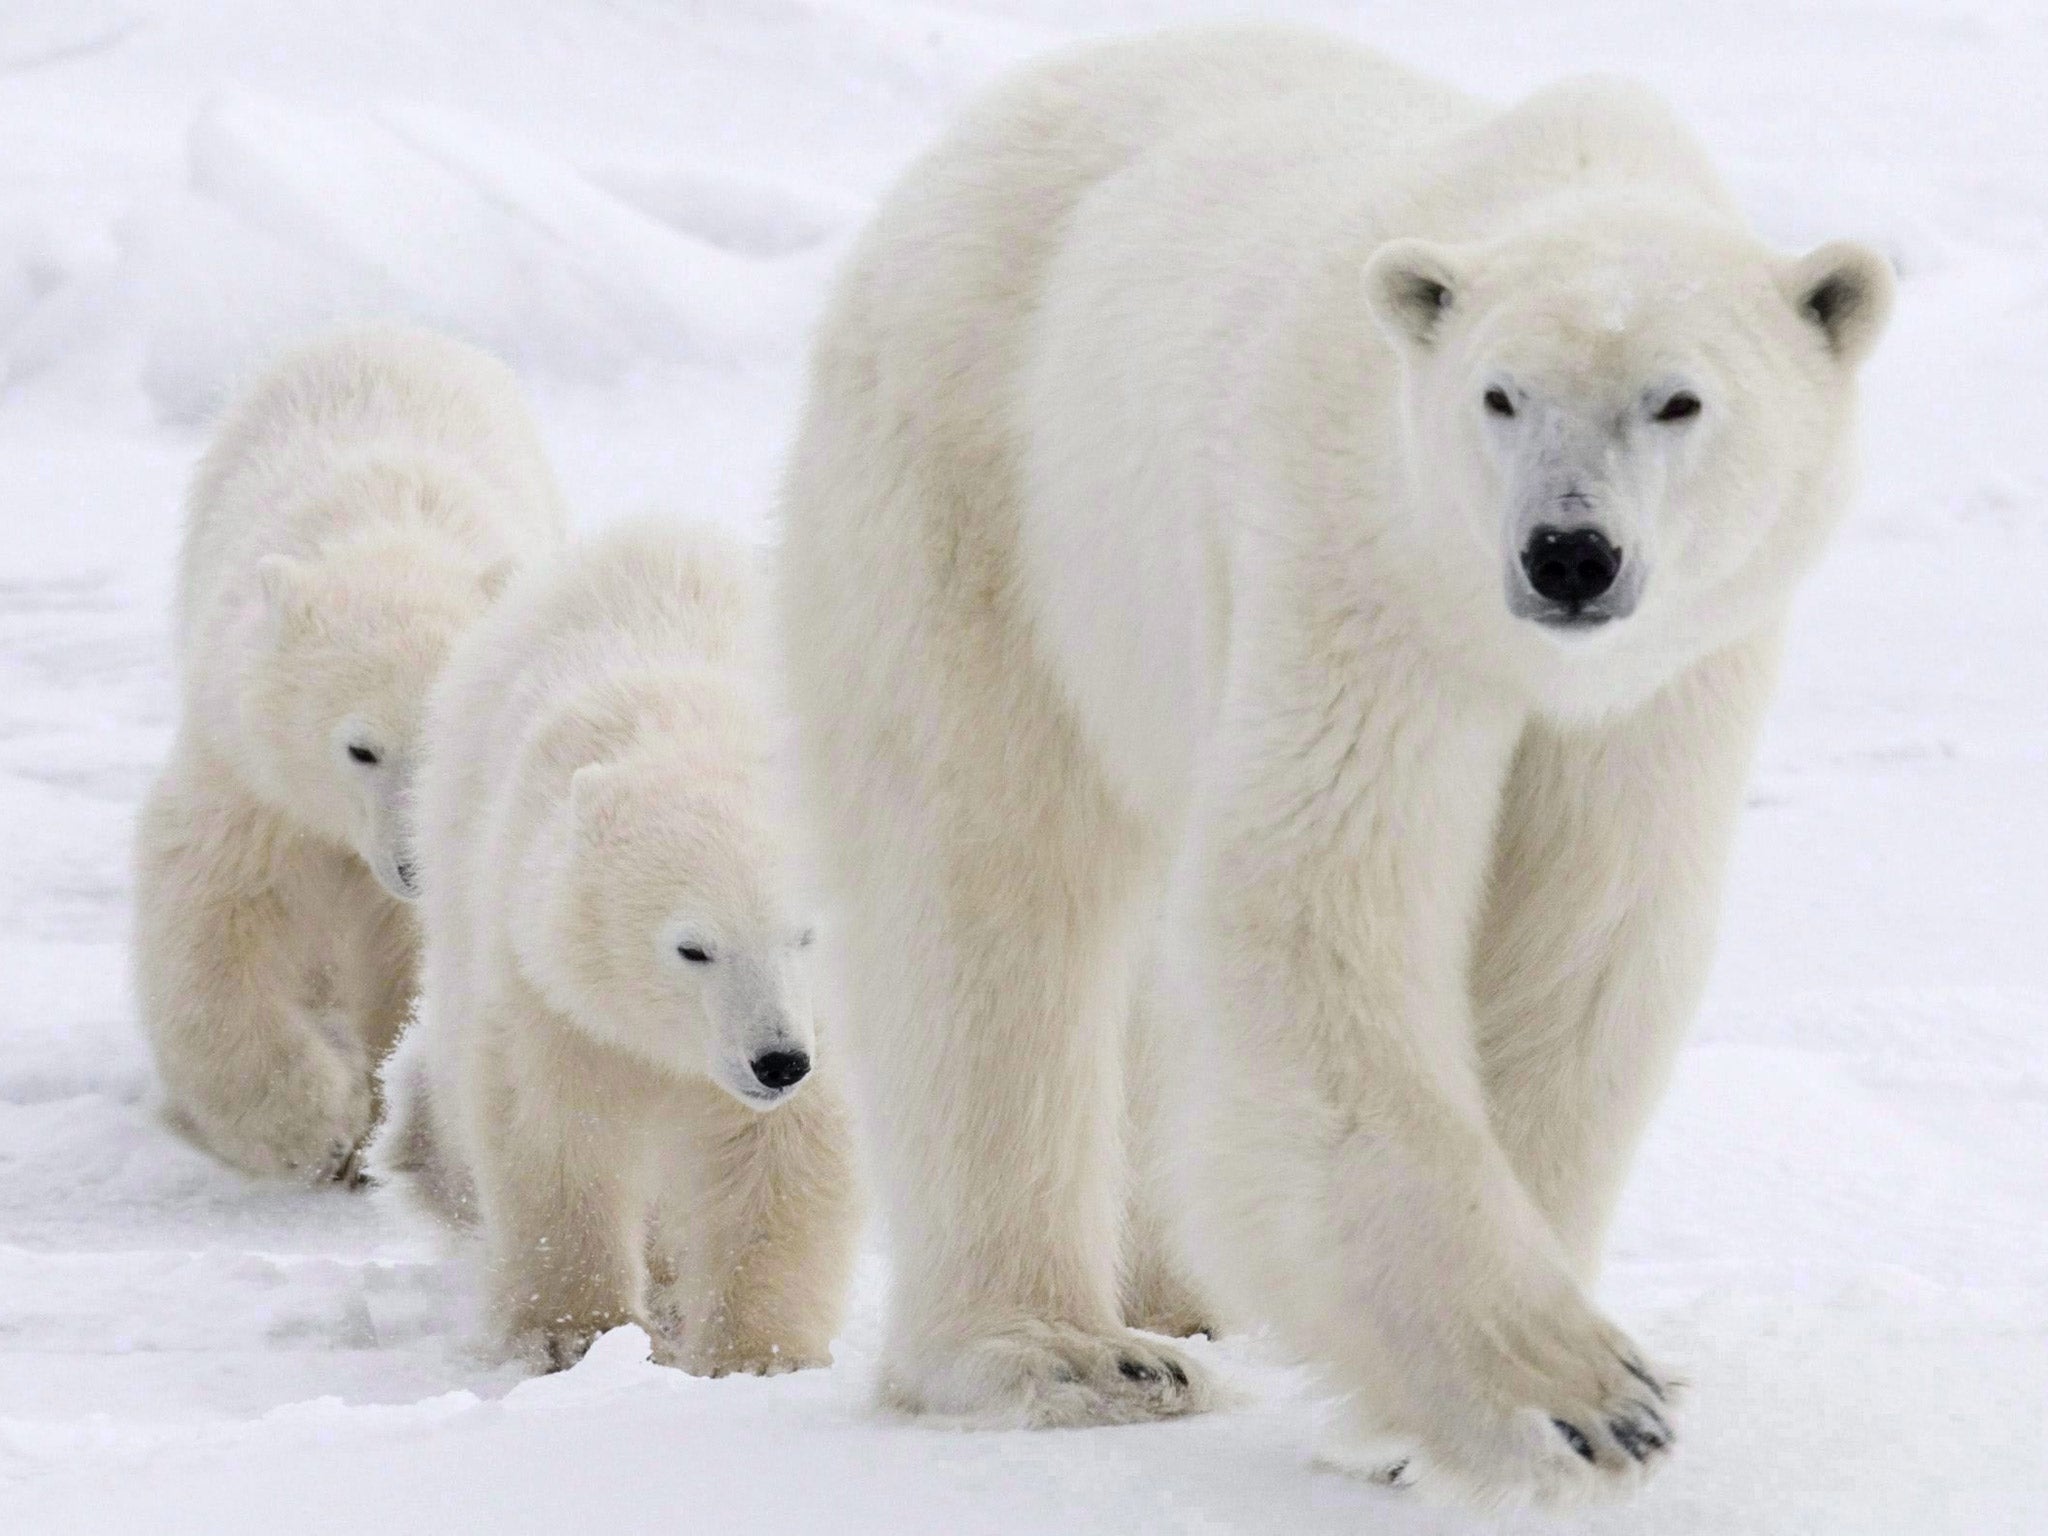 A US proposal to ban trade in polar bears’ skins has been rejected